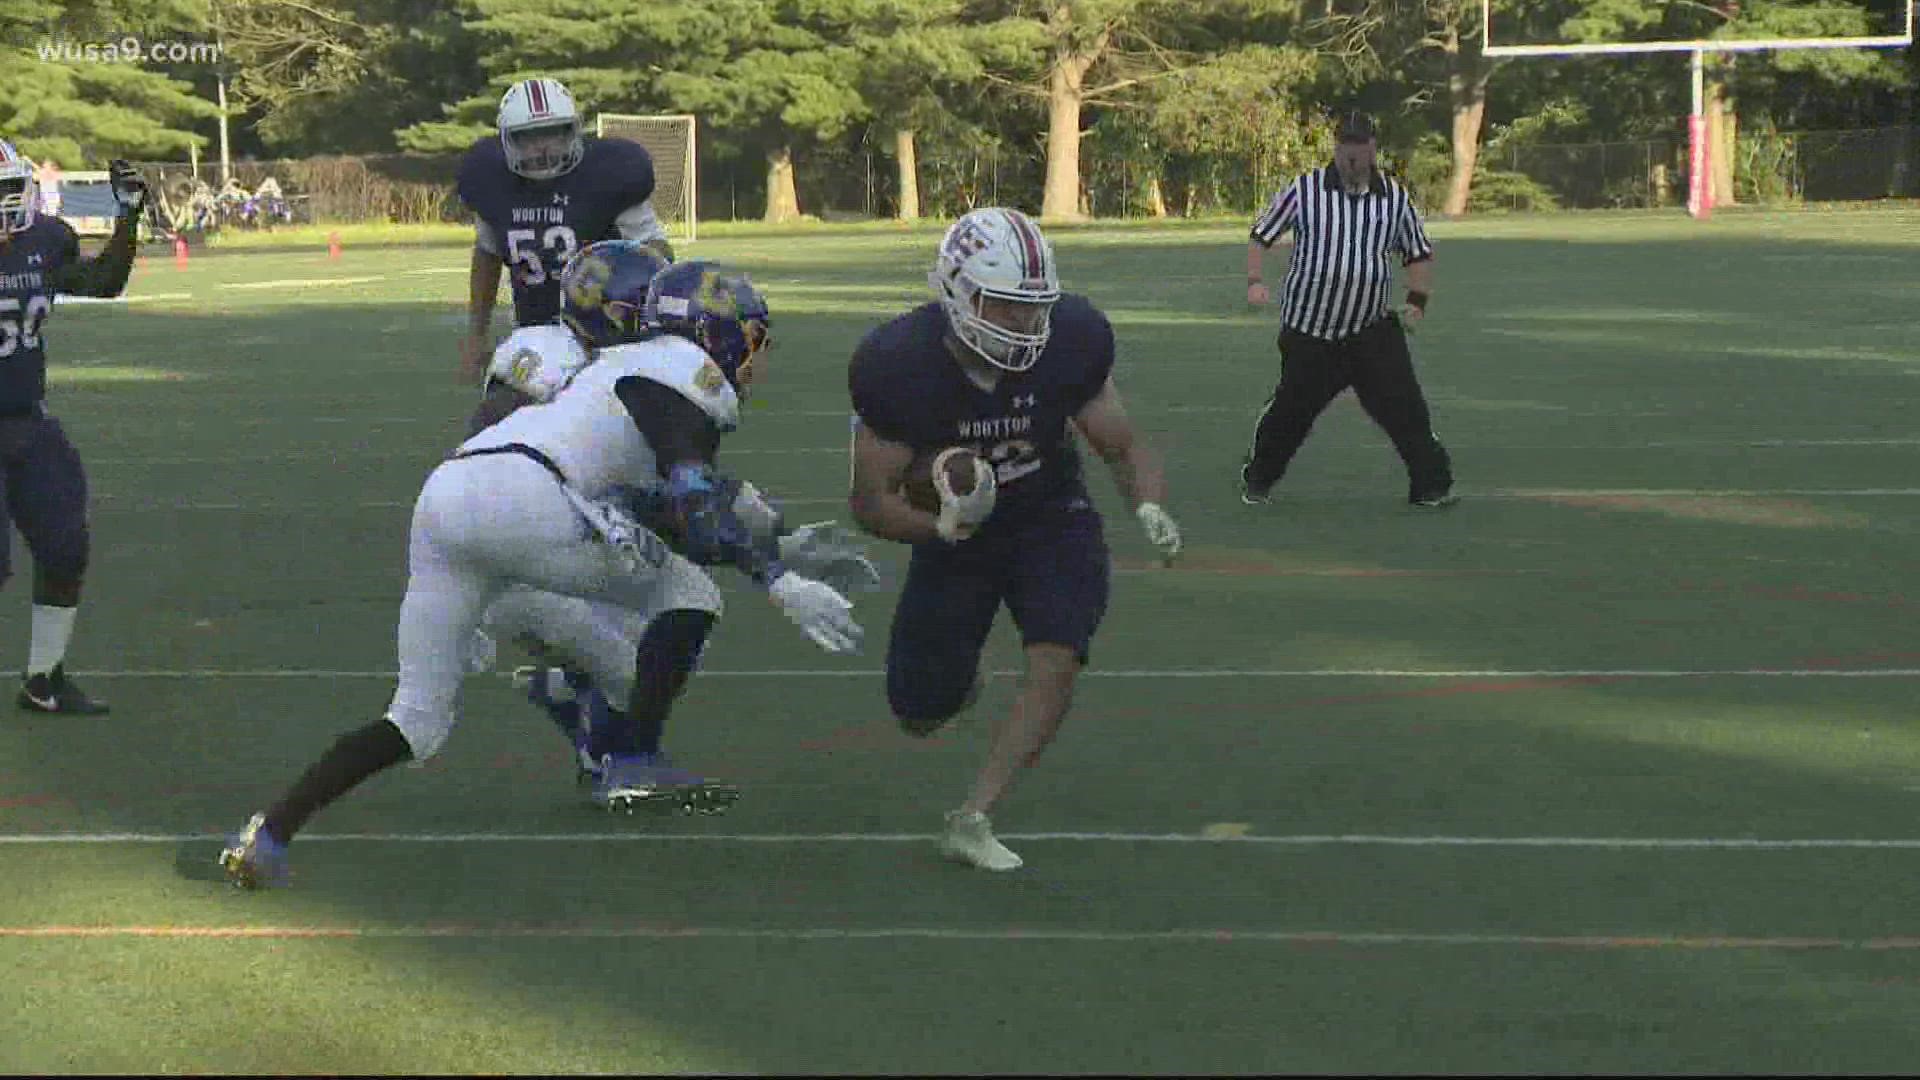 Wootton won WUSA9's Game of the Week with a win over Gaithersburg to start off the first week of high school football in Maryland for the 2021 season.